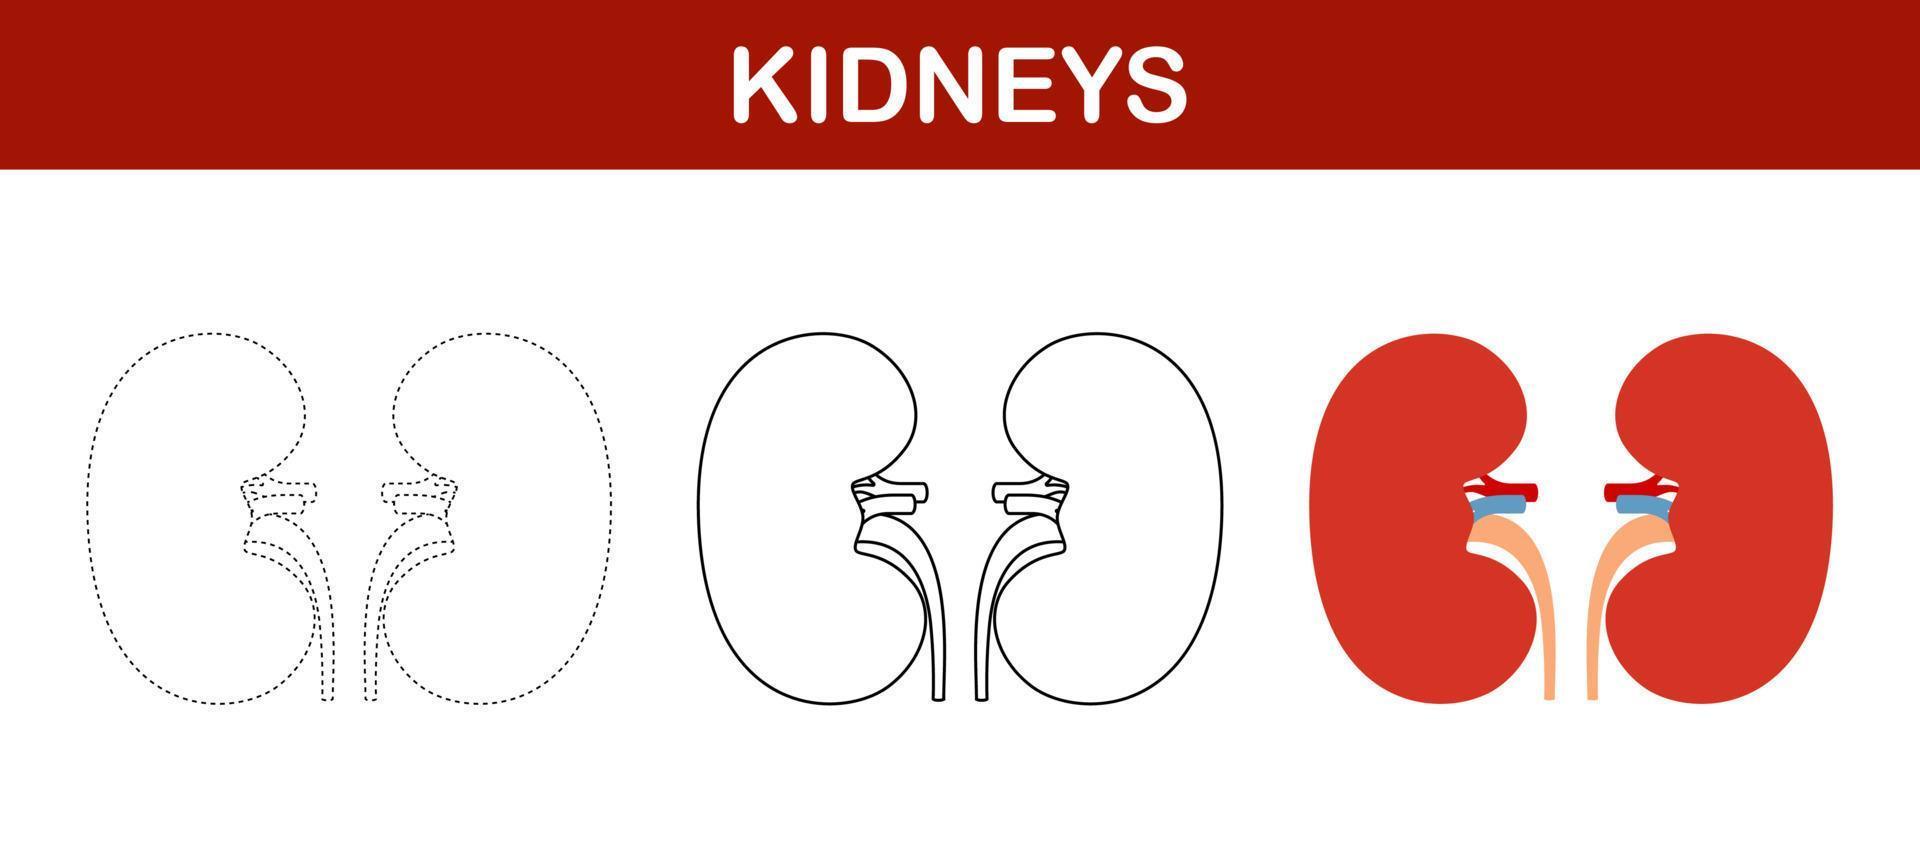 Kidney tracing and coloring worksheet for kids vector